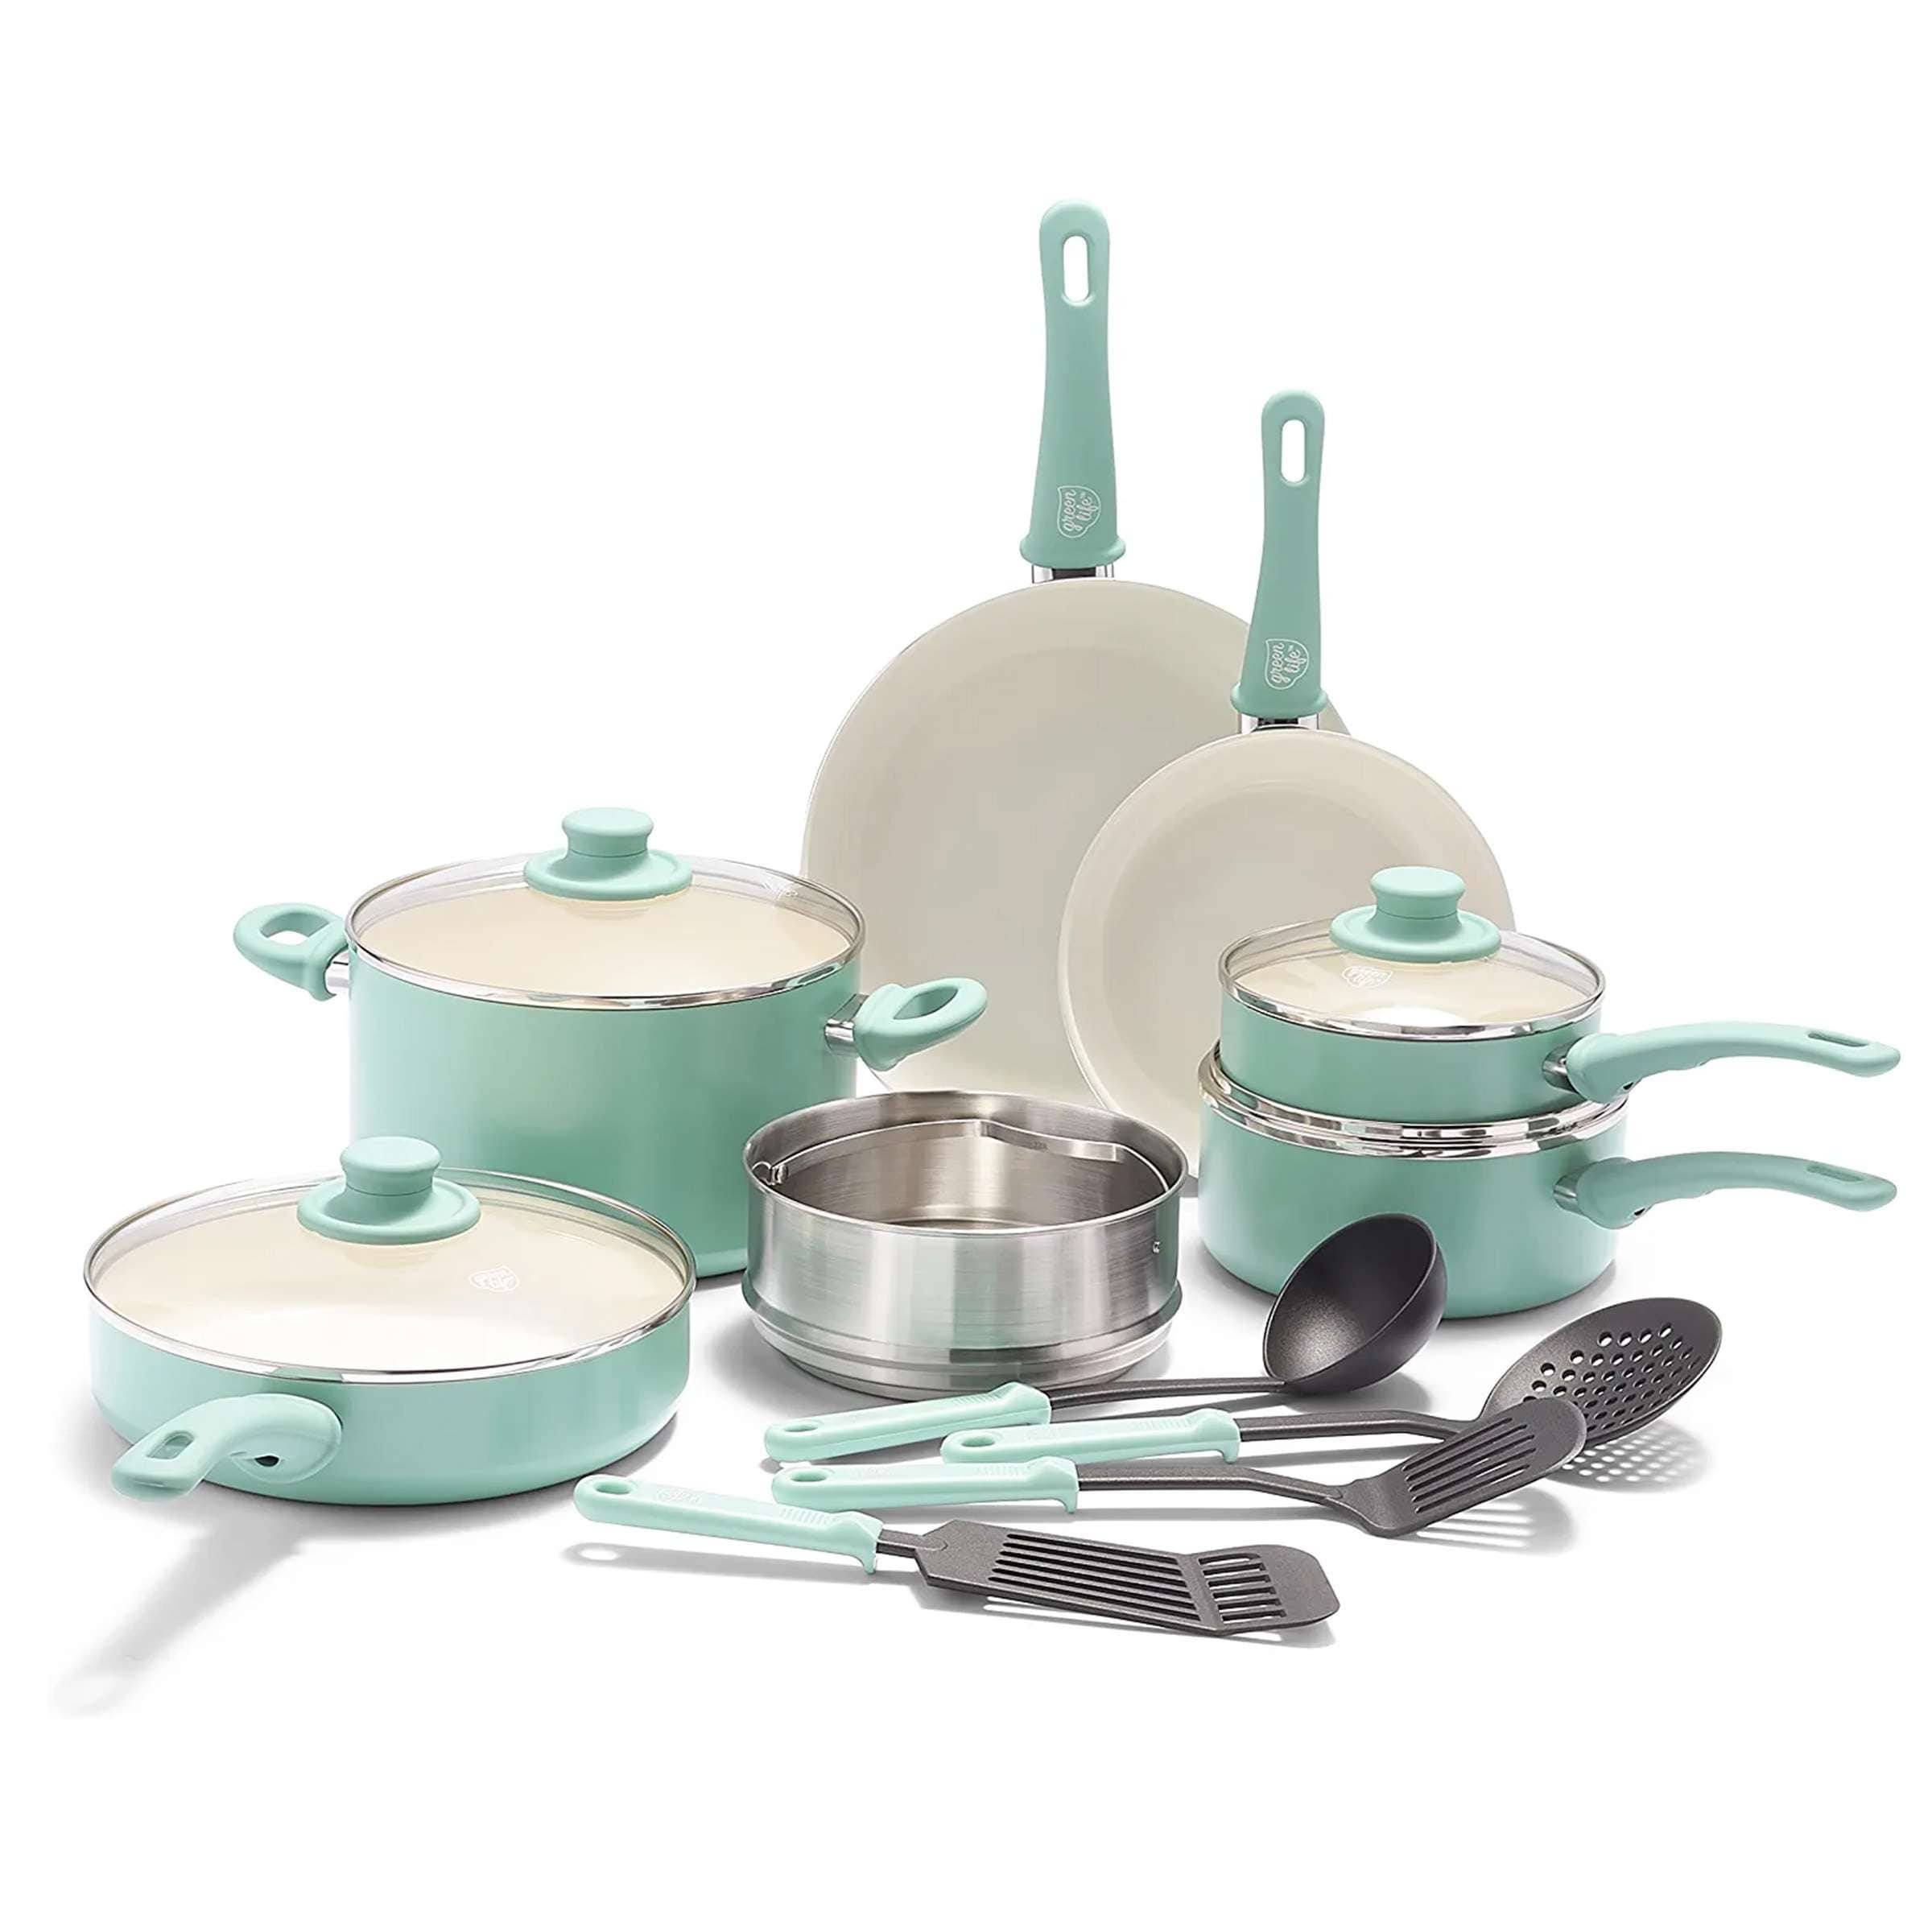 GreenLife Soft Grip Healthy Ceramic 15pc Cookware Set - On Sale